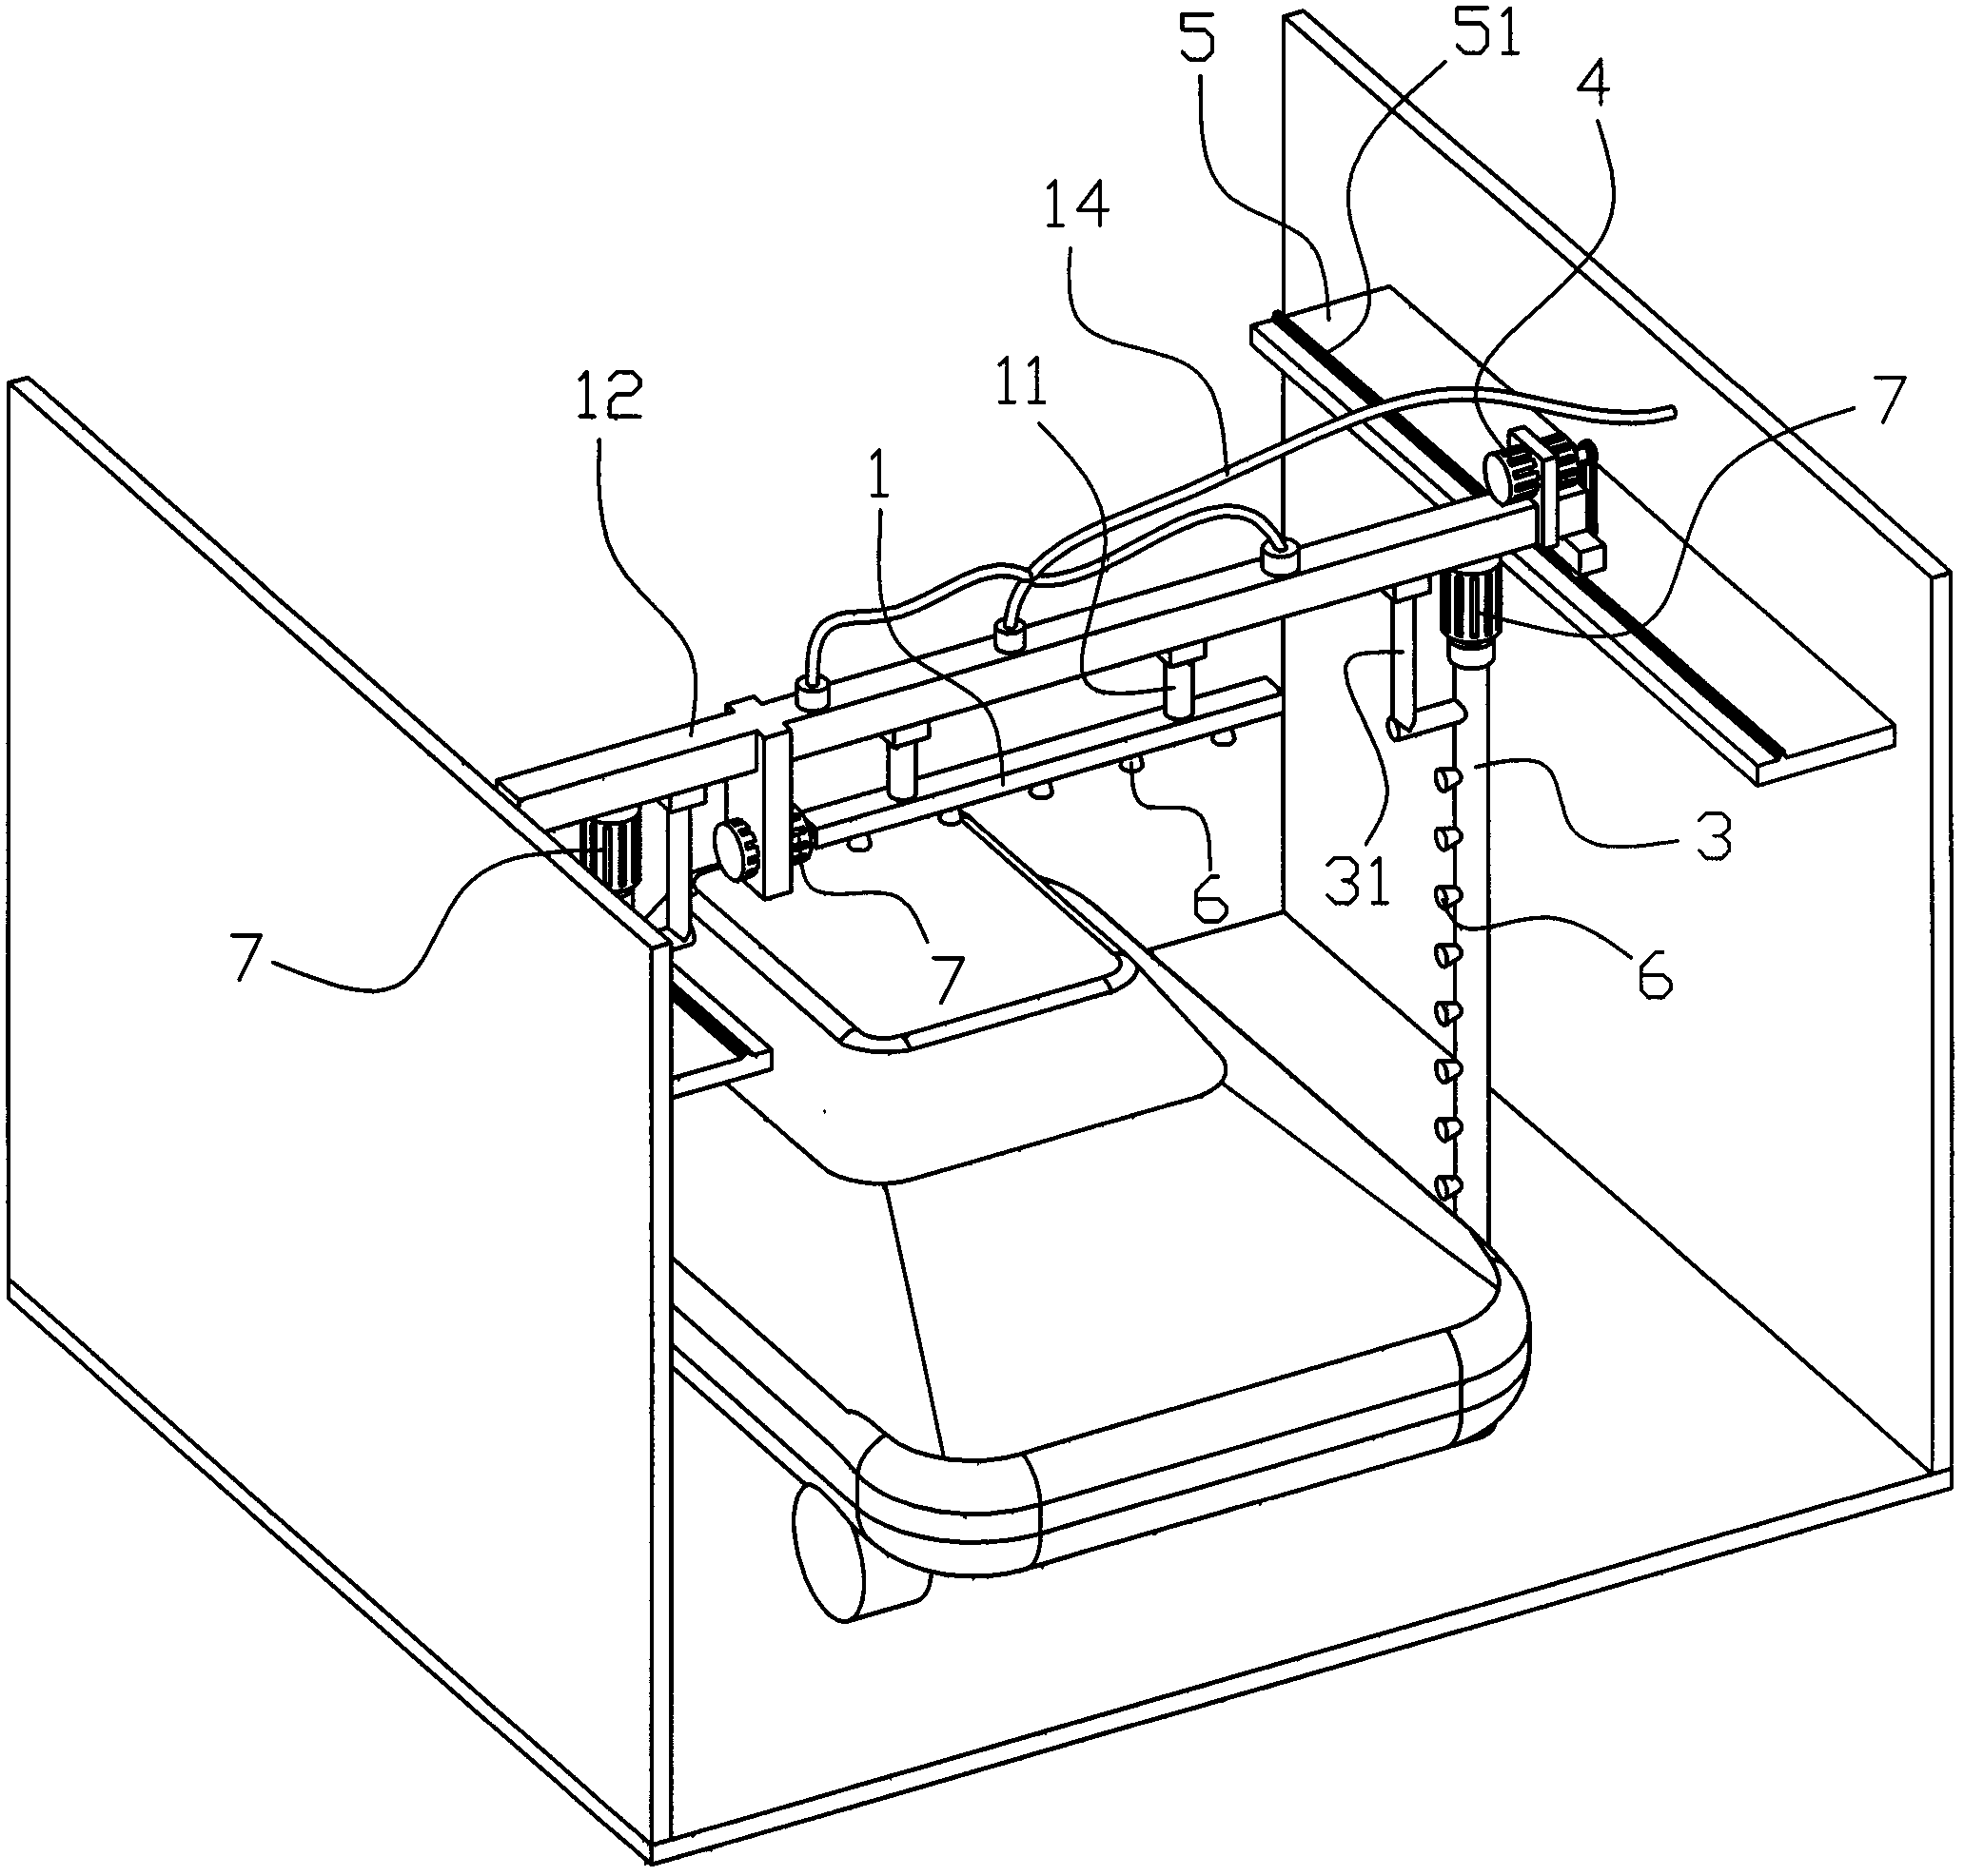 Automobile cleaning device